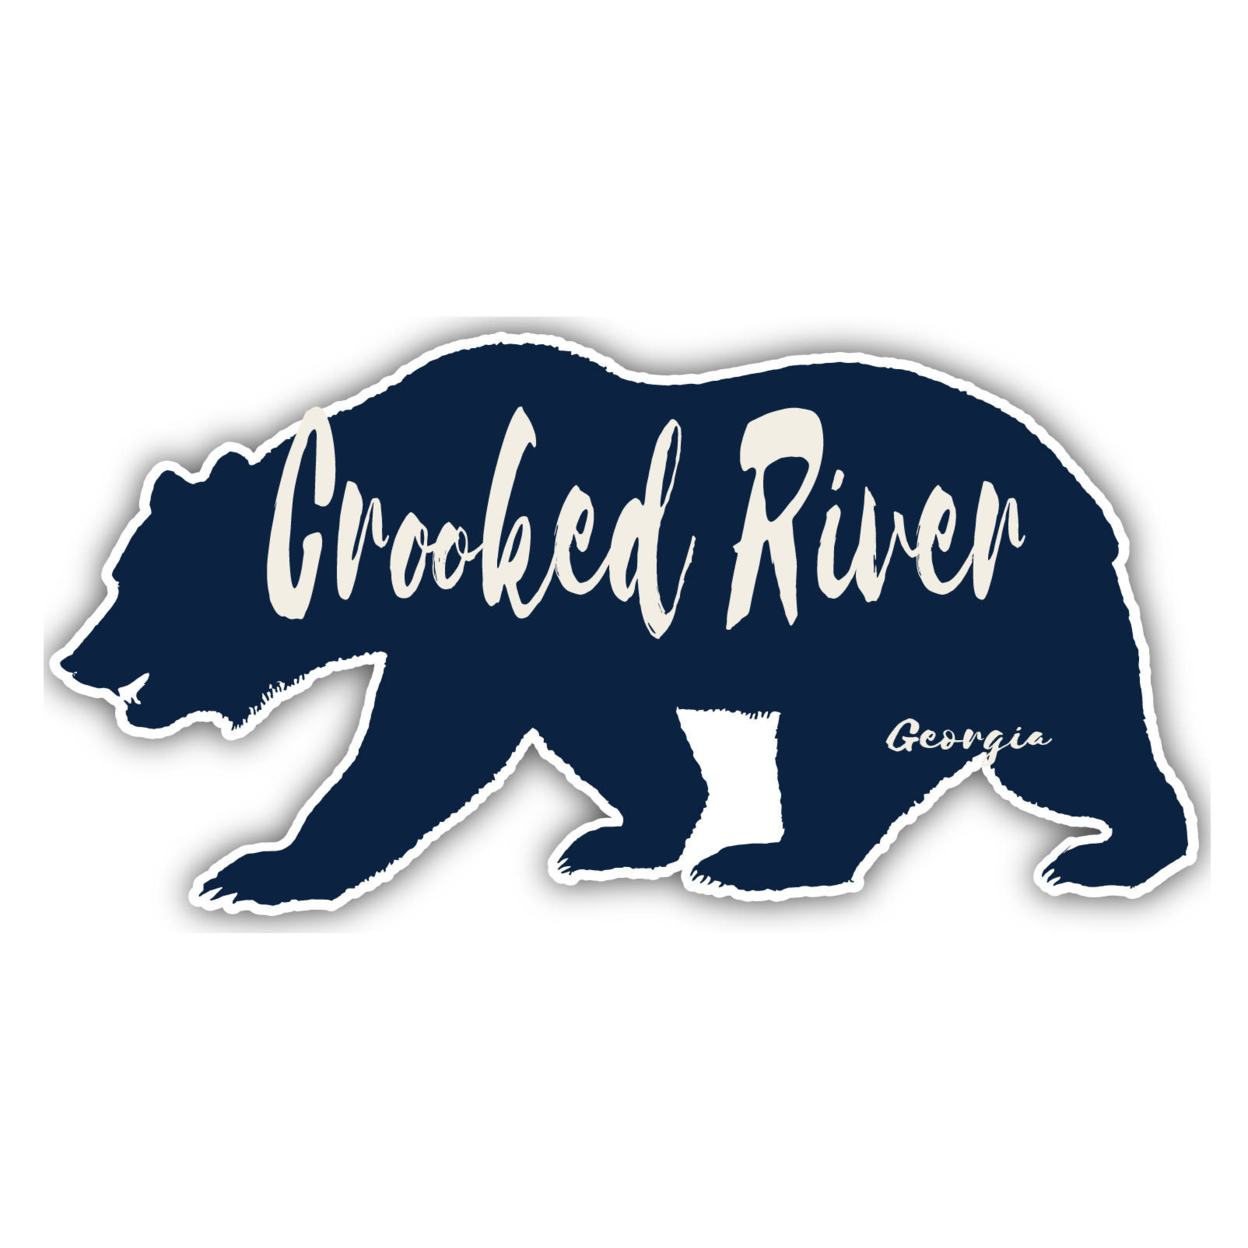 Crooked River Georgia Souvenir Decorative Stickers (Choose Theme And Size) - 4-Pack, 8-Inch, Bear